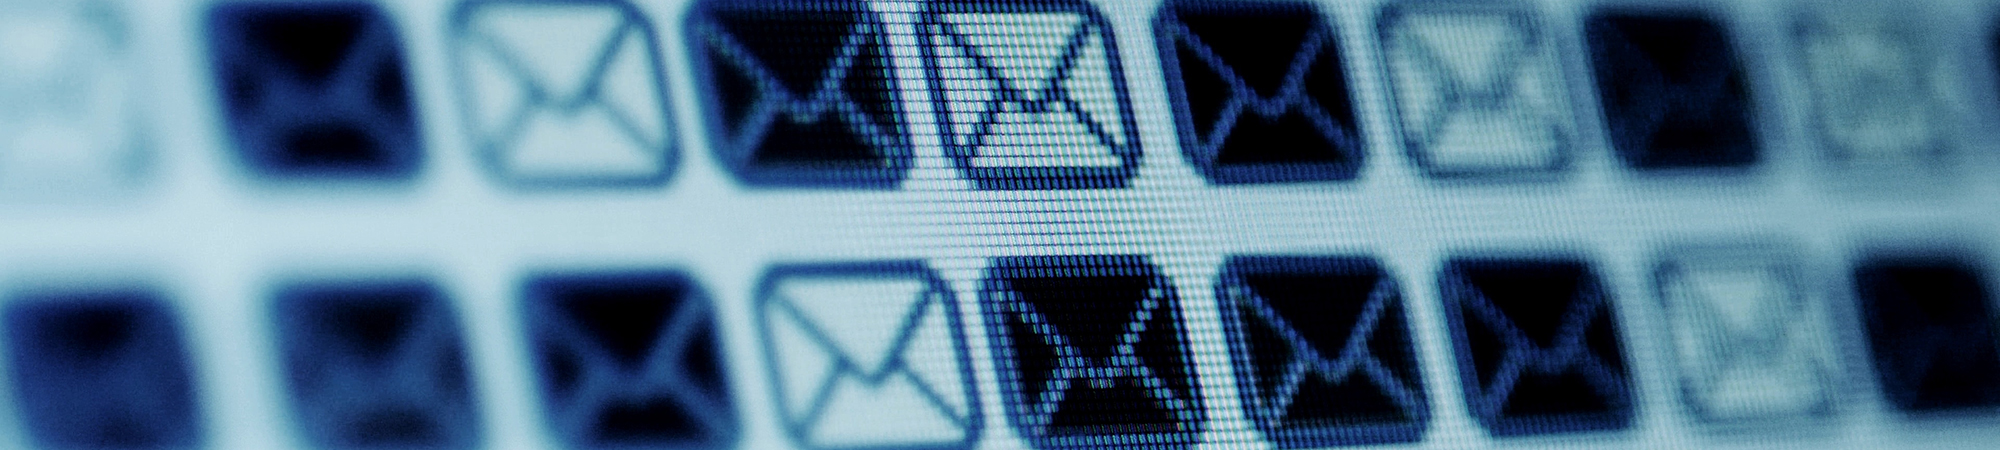 Banner showing email icons on screen